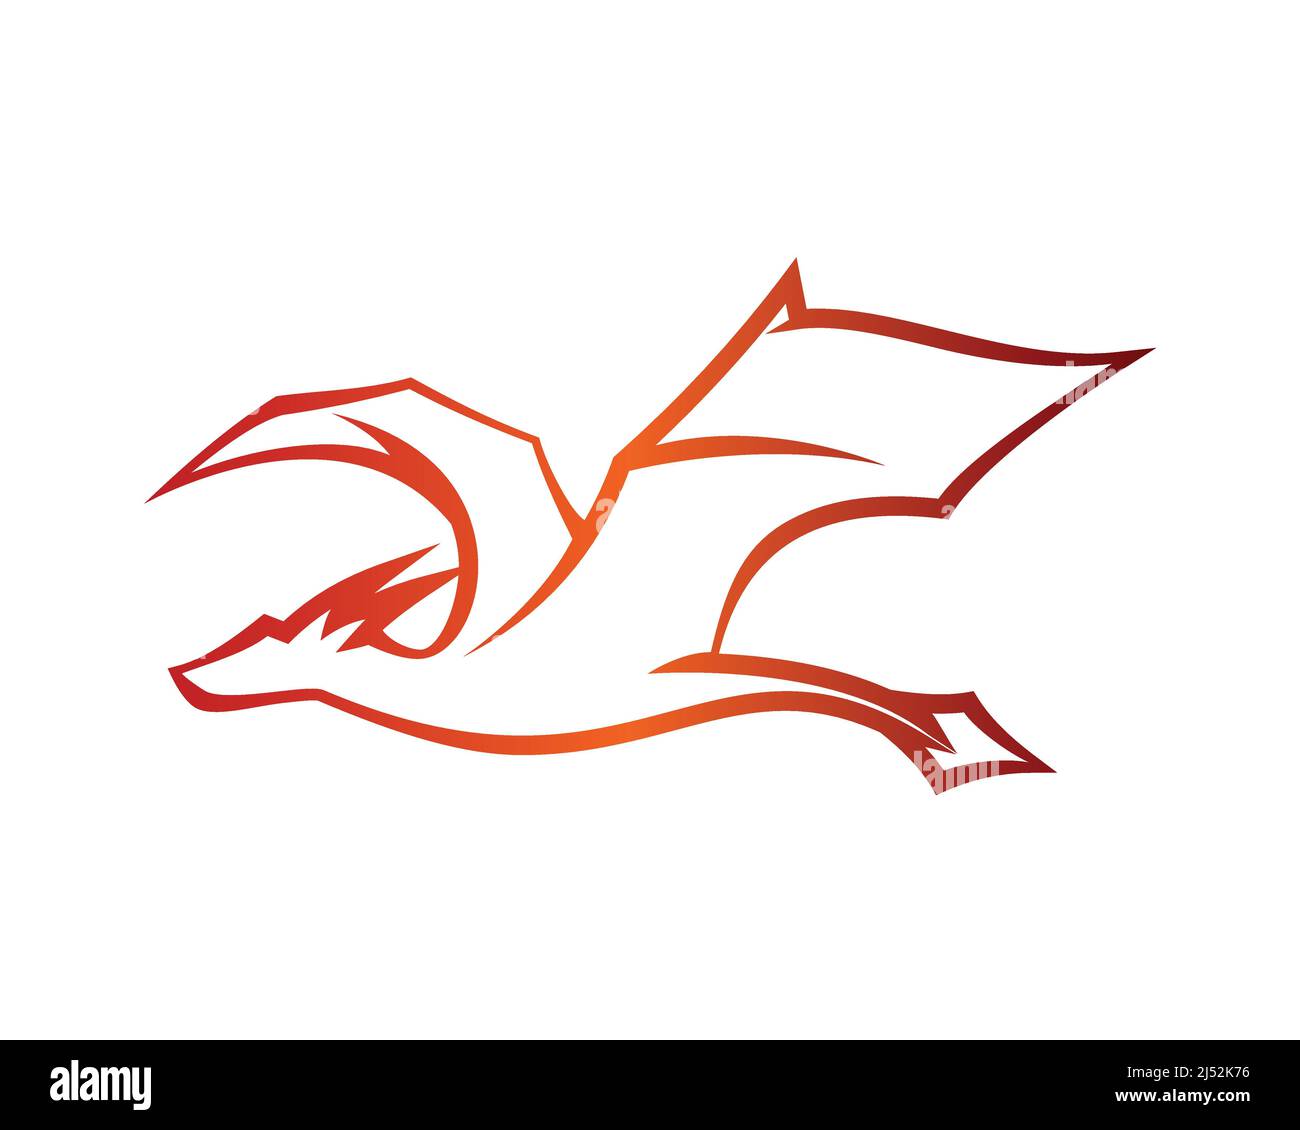 Flying Dragon Illustration with Silhouette Style Vector Stock Vector